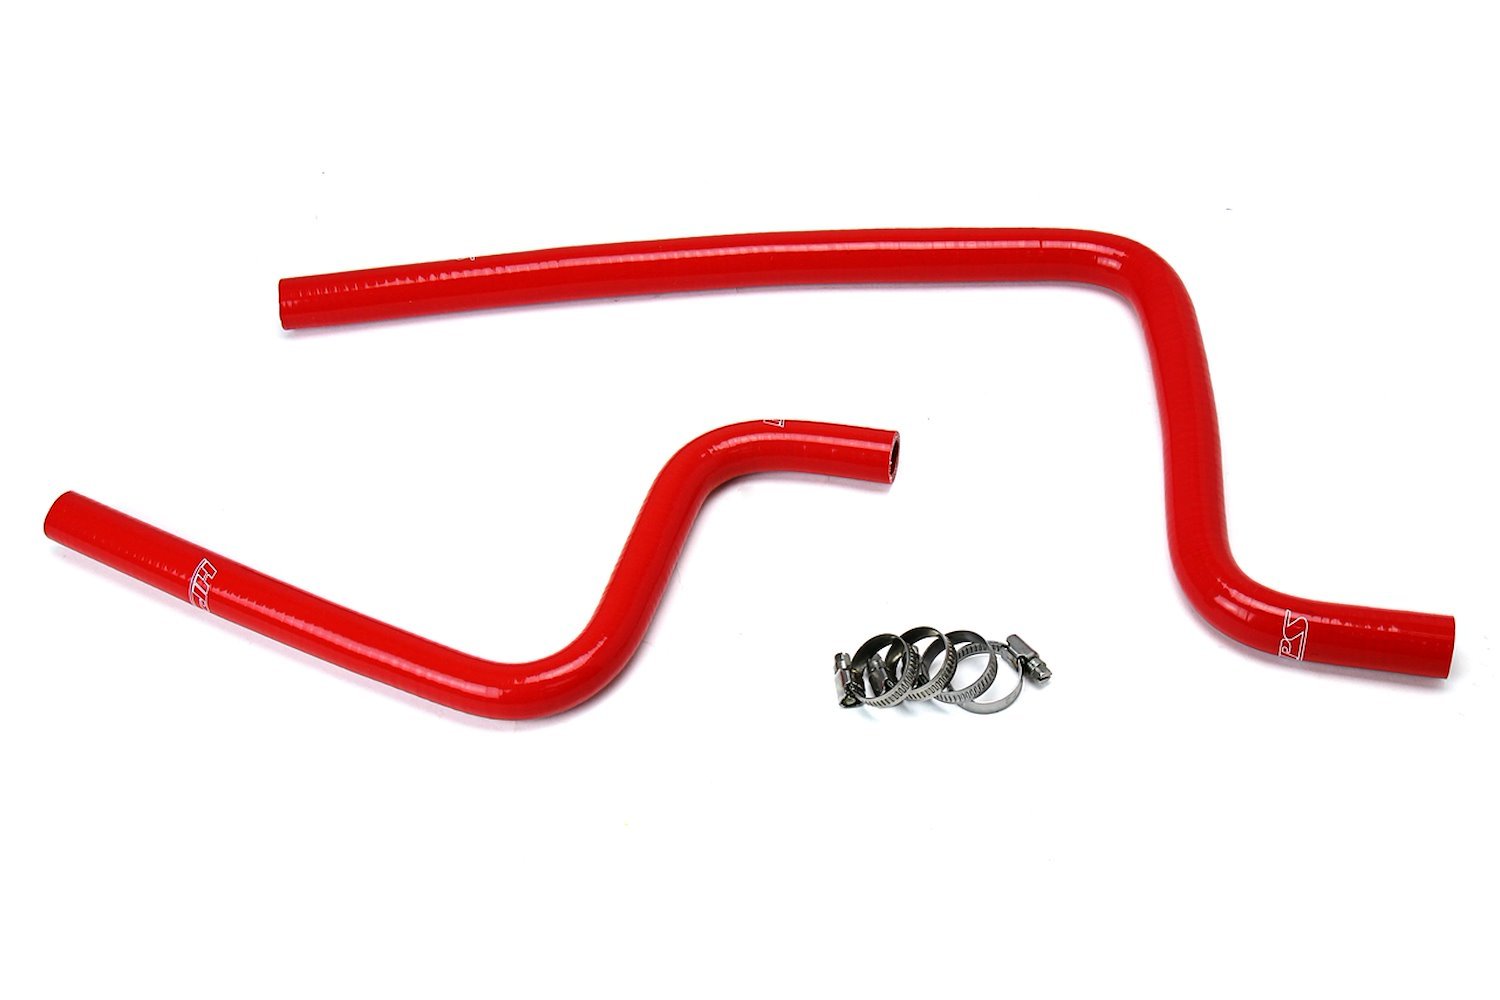 57-1590-RED Heater Hose Kit, High-Temp 3-Ply Reinforced Silicone, Replace OEM Rubber Heater Coolant Hoses